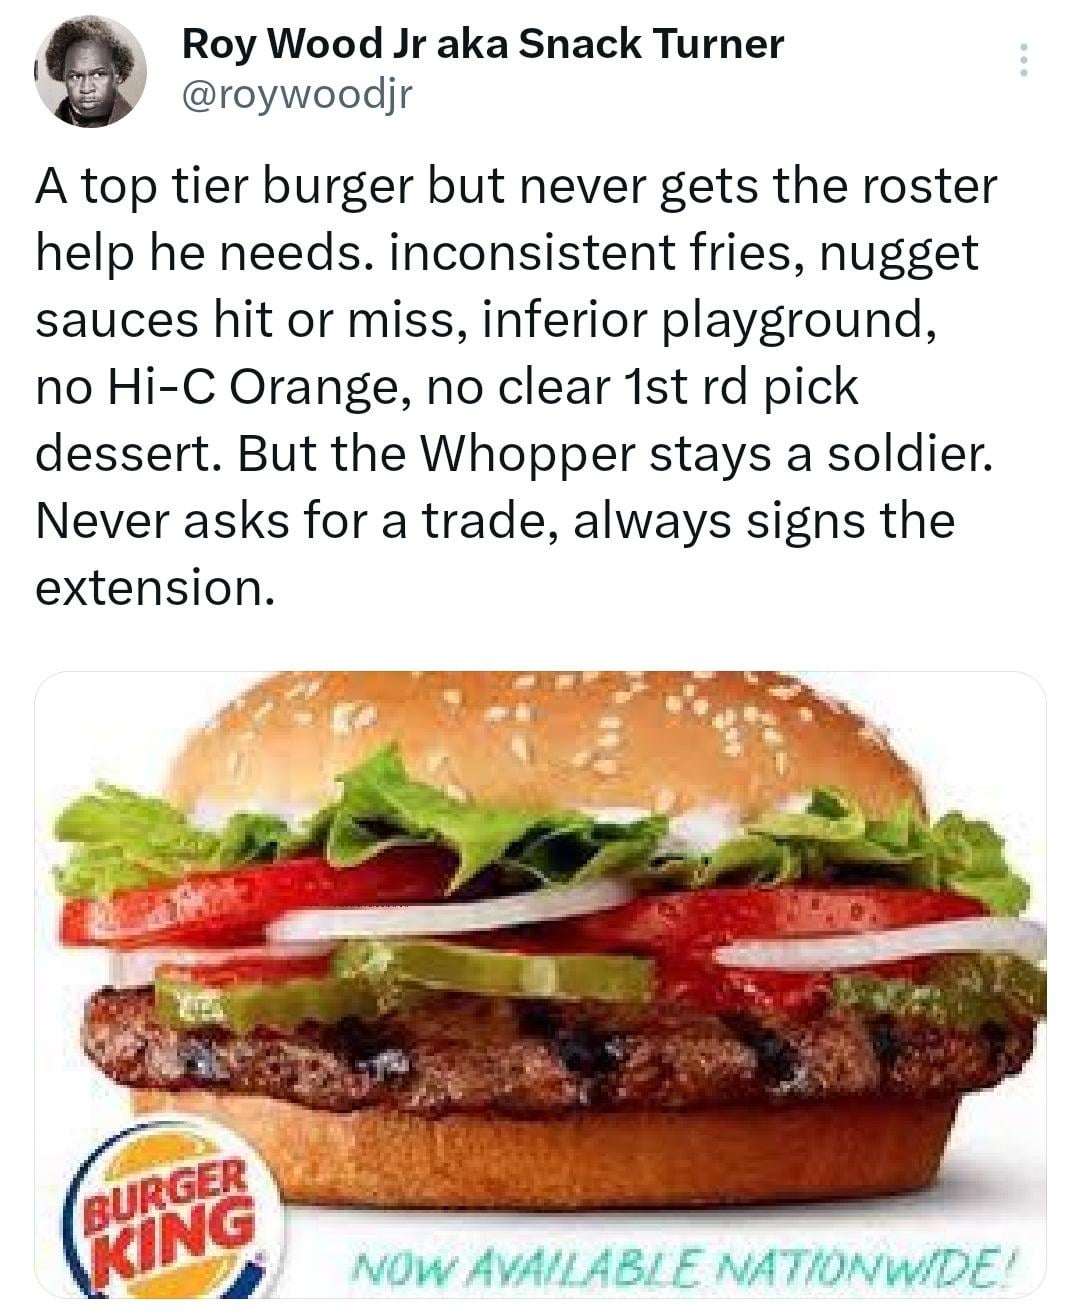 twitter memes - burger king - Roy Wood Jr aka Snack Turner A top tier burger but never gets the roster help he needs. inconsistent fries, nugget sauces hit or miss, inferior playground, no HiC Orange, no clear 1st rd pick dessert. But the Whopper stays a 